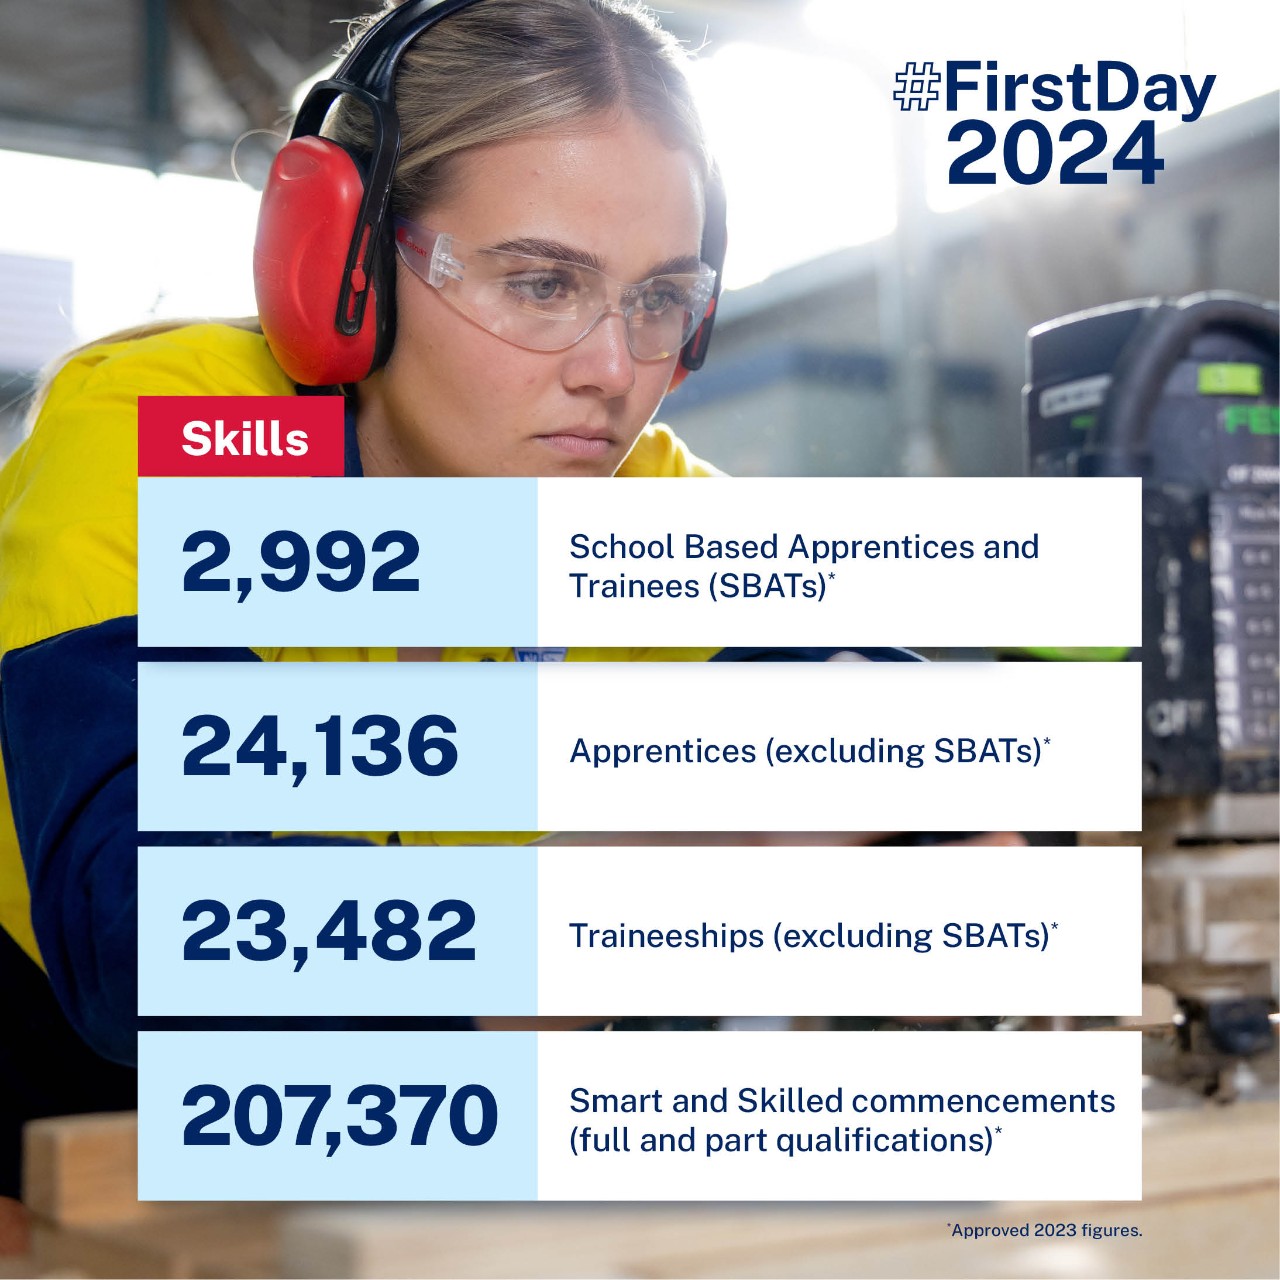 Infographic about Skills with stats like 2,574 School Based Apprentices and Trainees approved in 2022 22,261 Apprenticeships approved in 2022 38,668 Traineeships approved in 2022   206,270 Smart and Skilled commencements in 2022